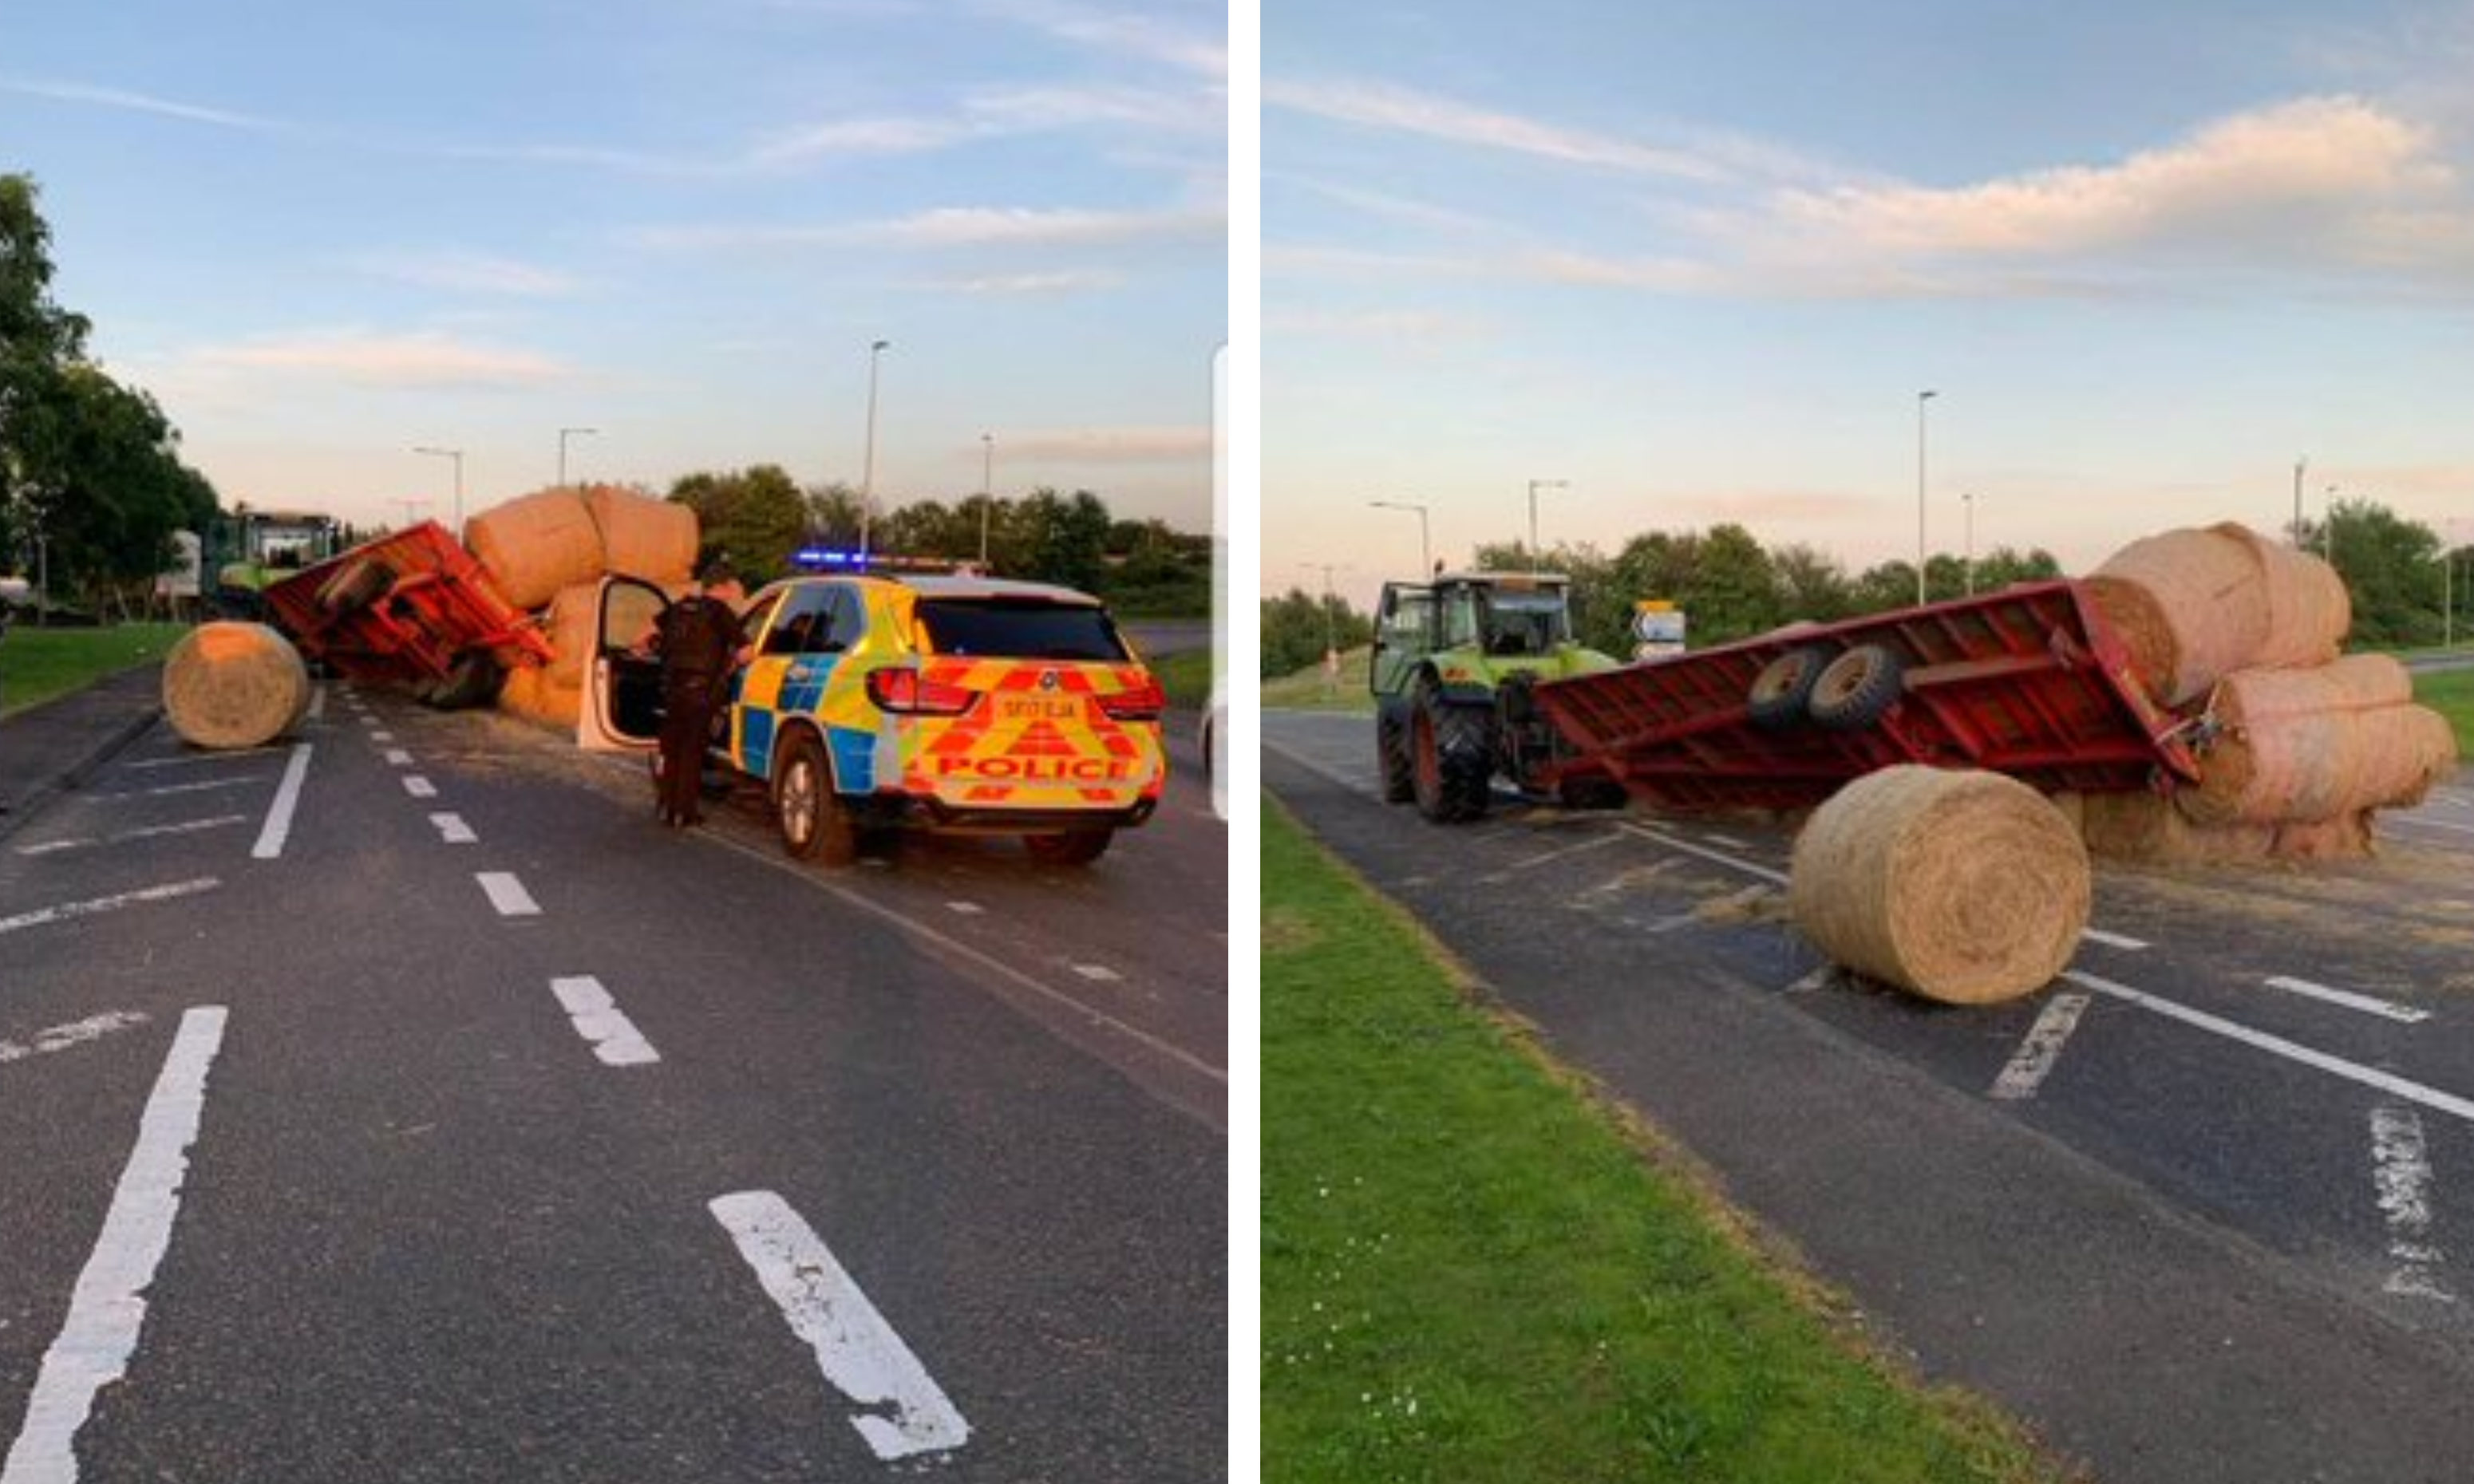 The bales on the A9.